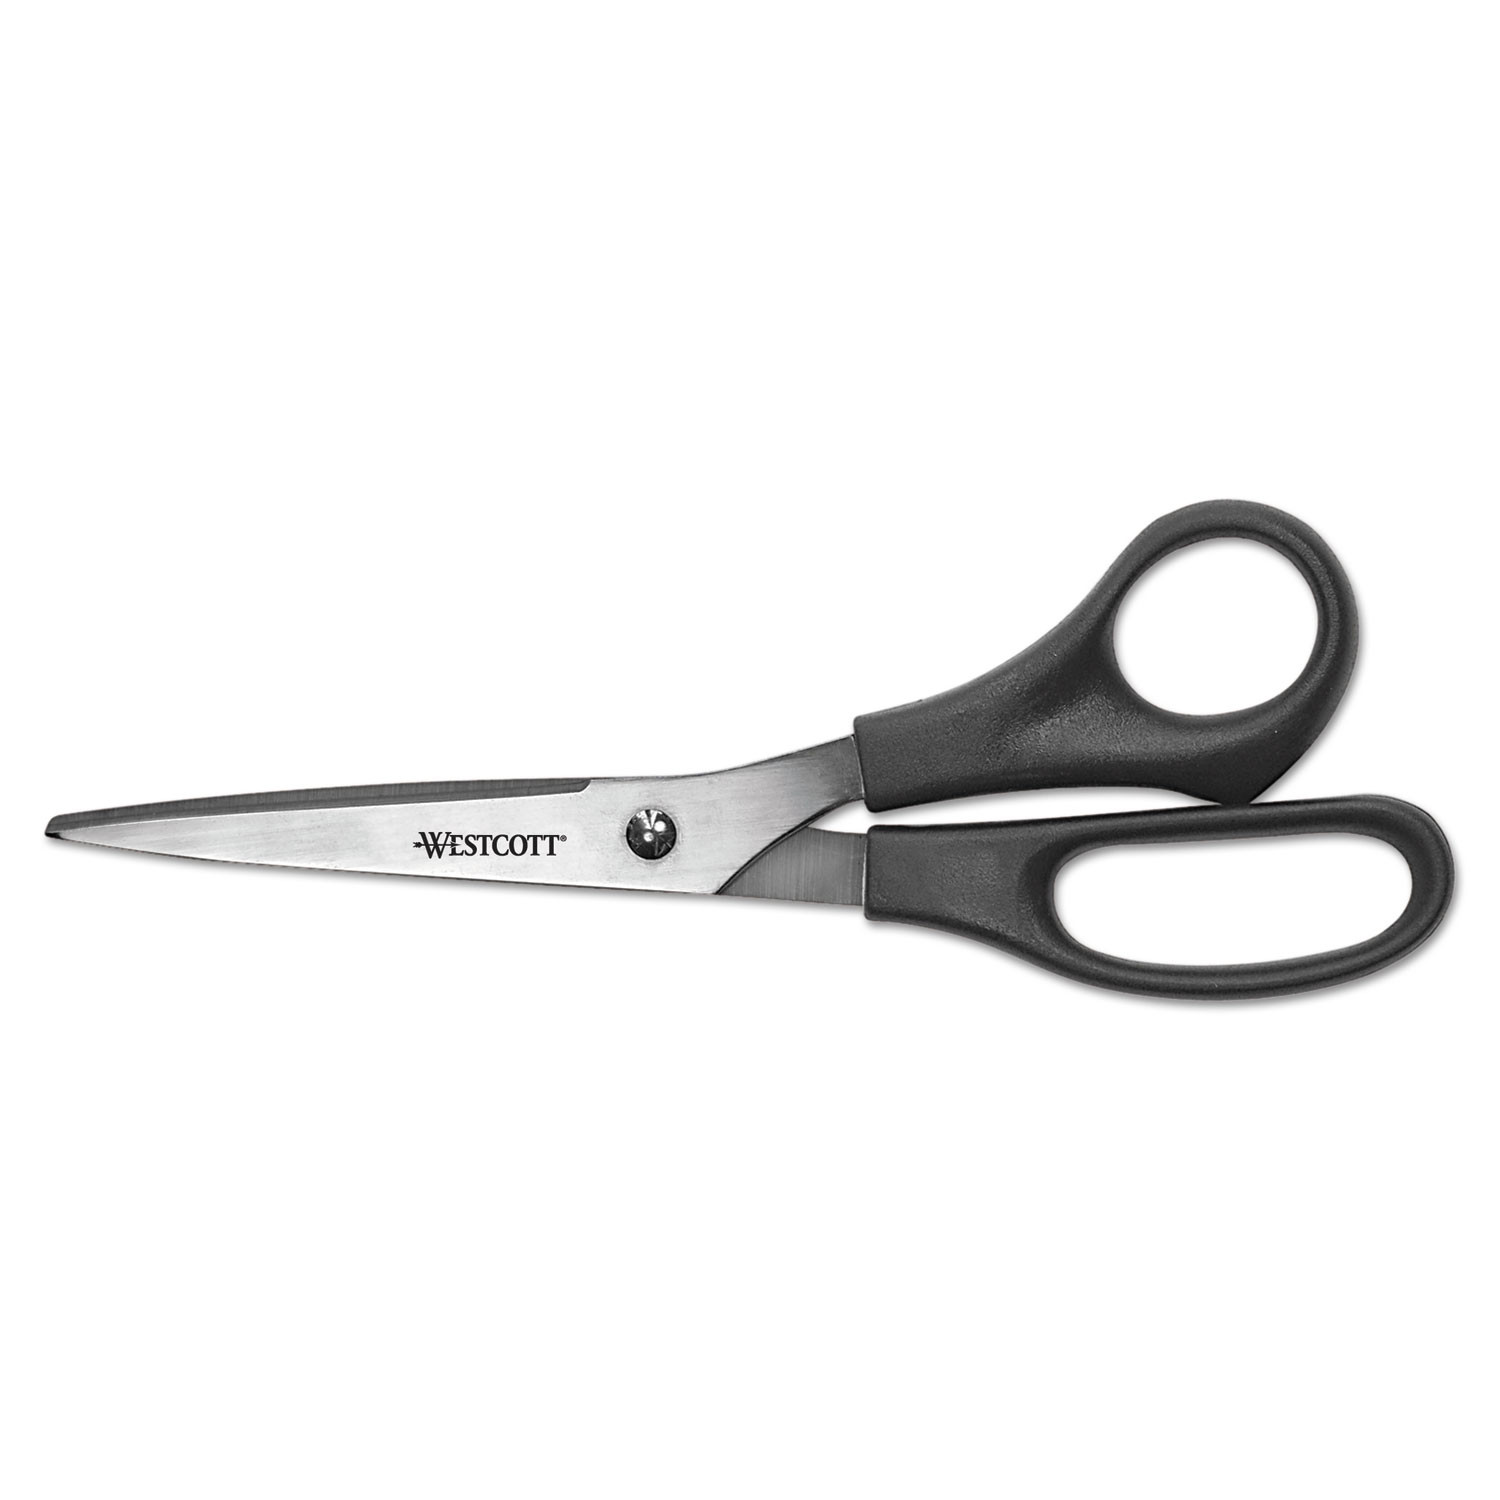 Design Line Straight Stainless Steel Scissors, 8 Long, 3.13 Cut Length,  Black Straight Handle - Office Express Office Products